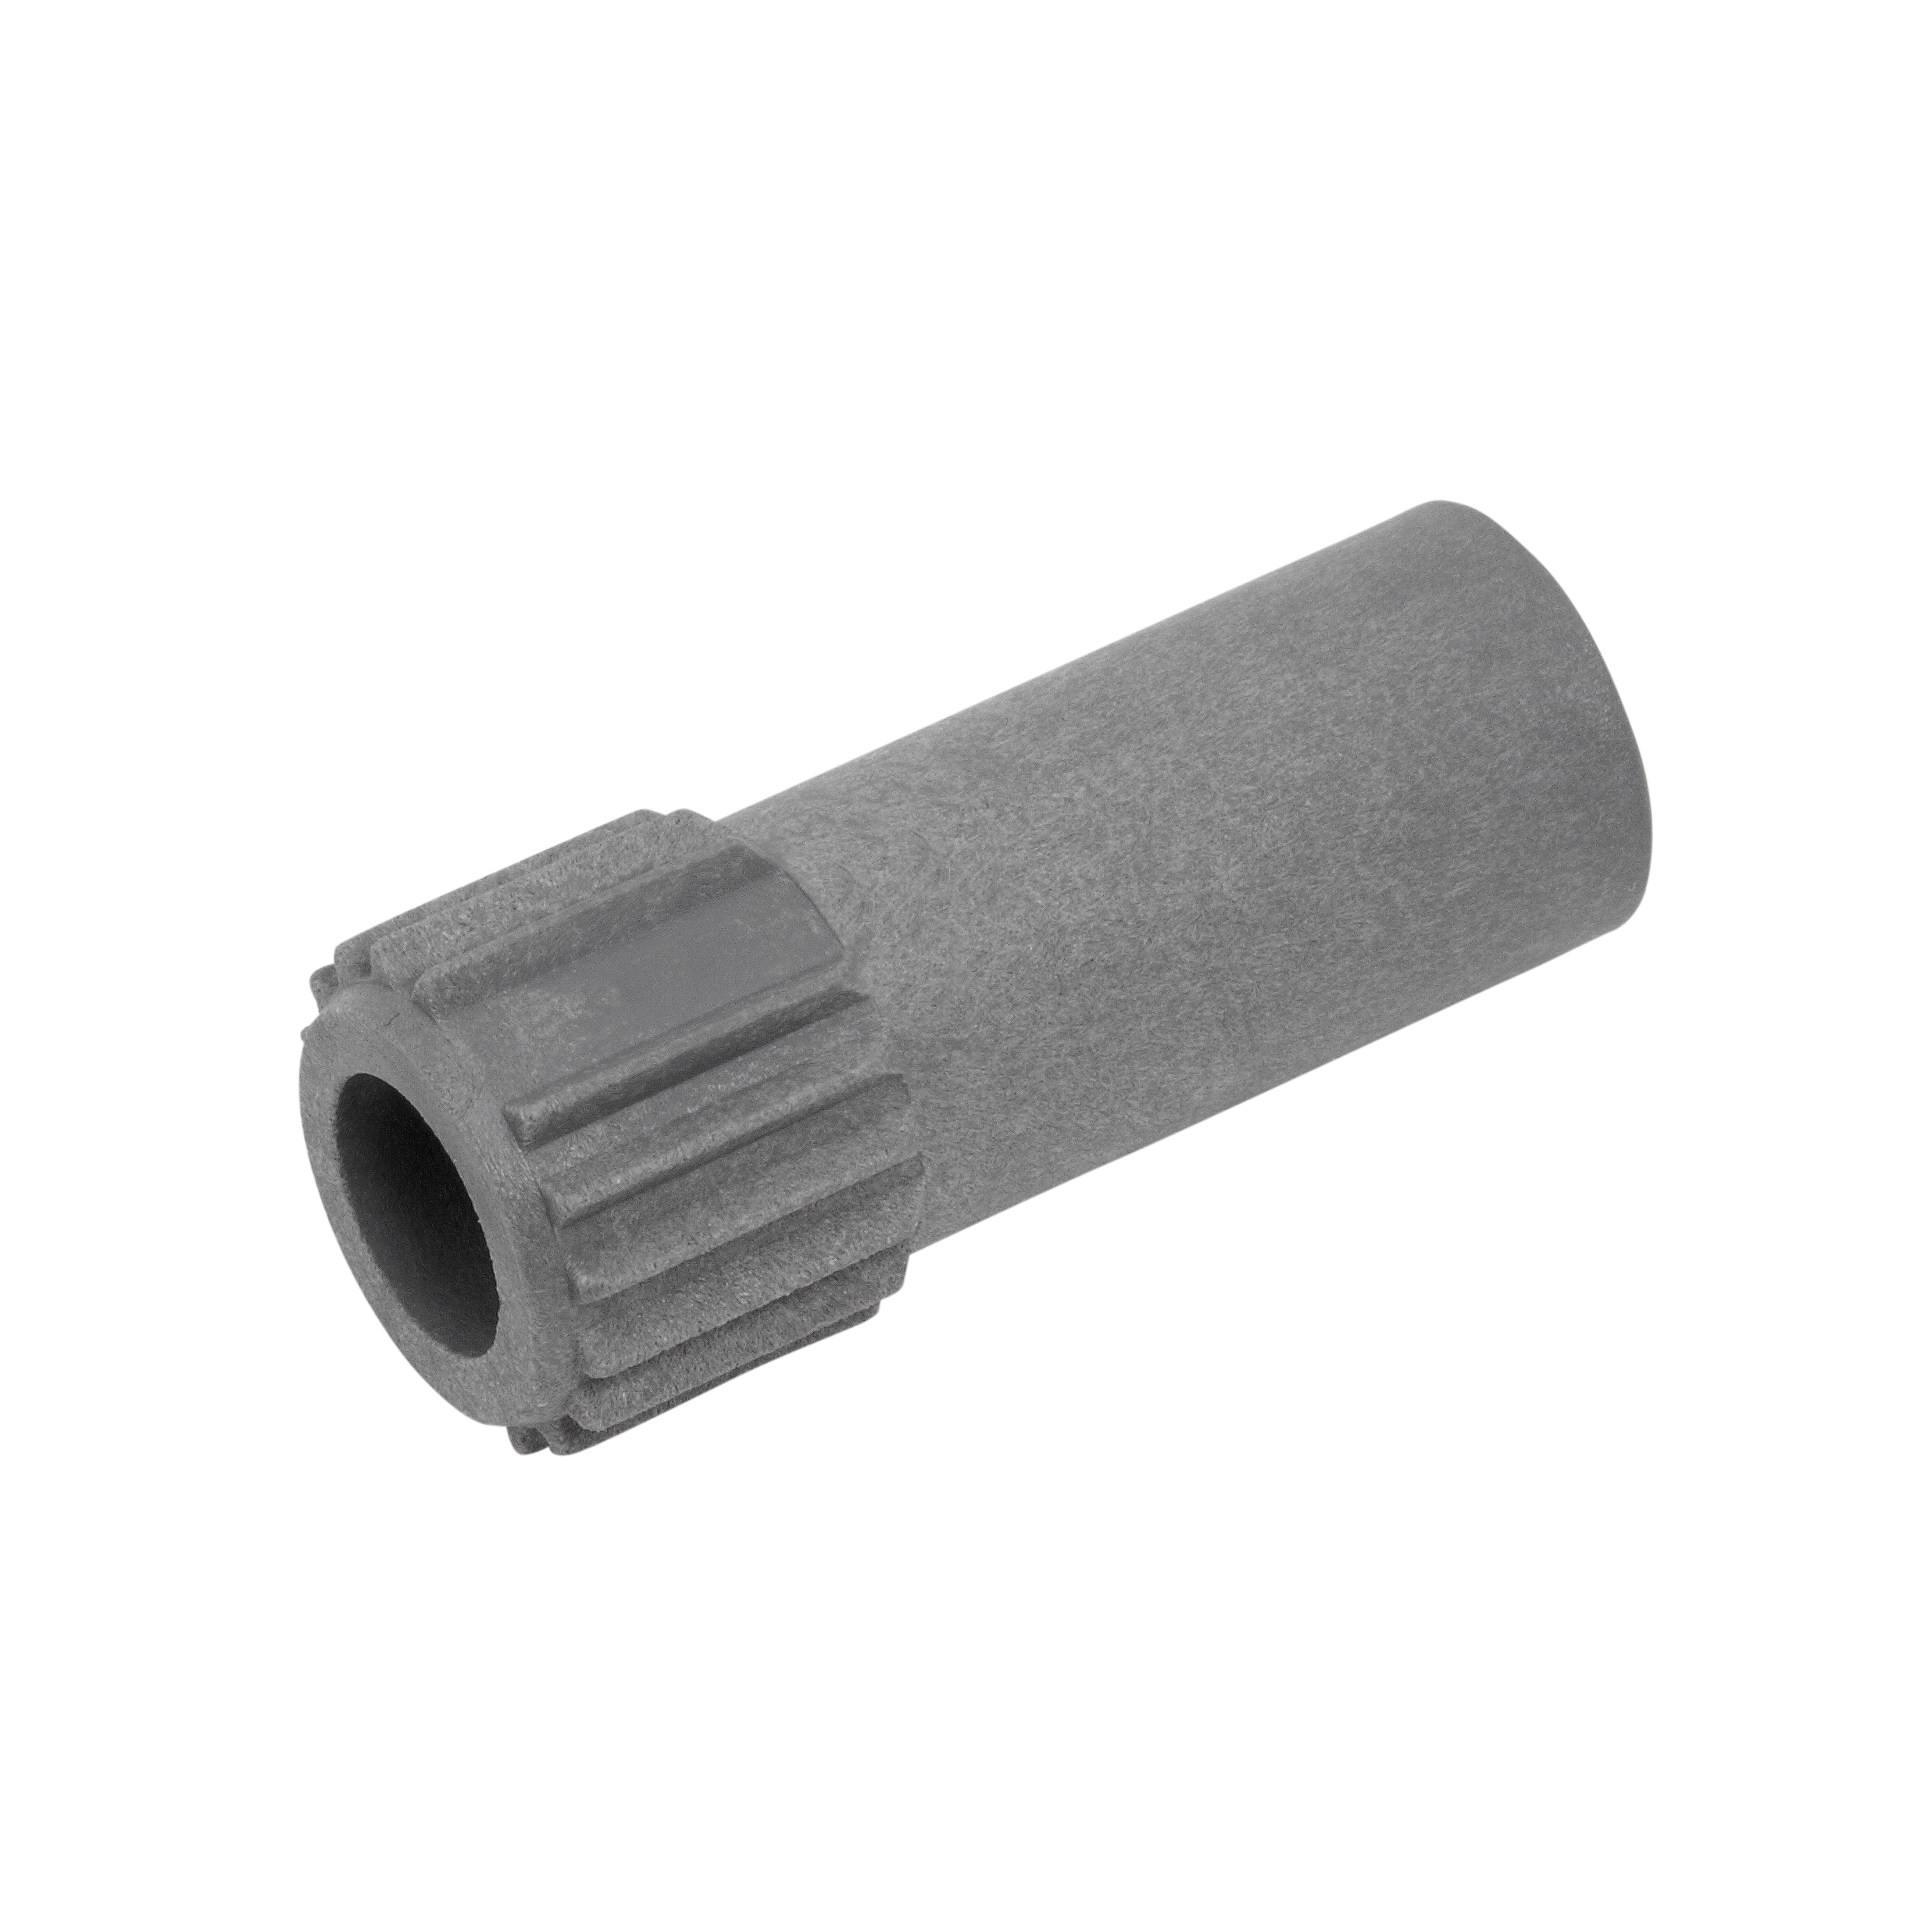 Town Square Long Handle Adapter